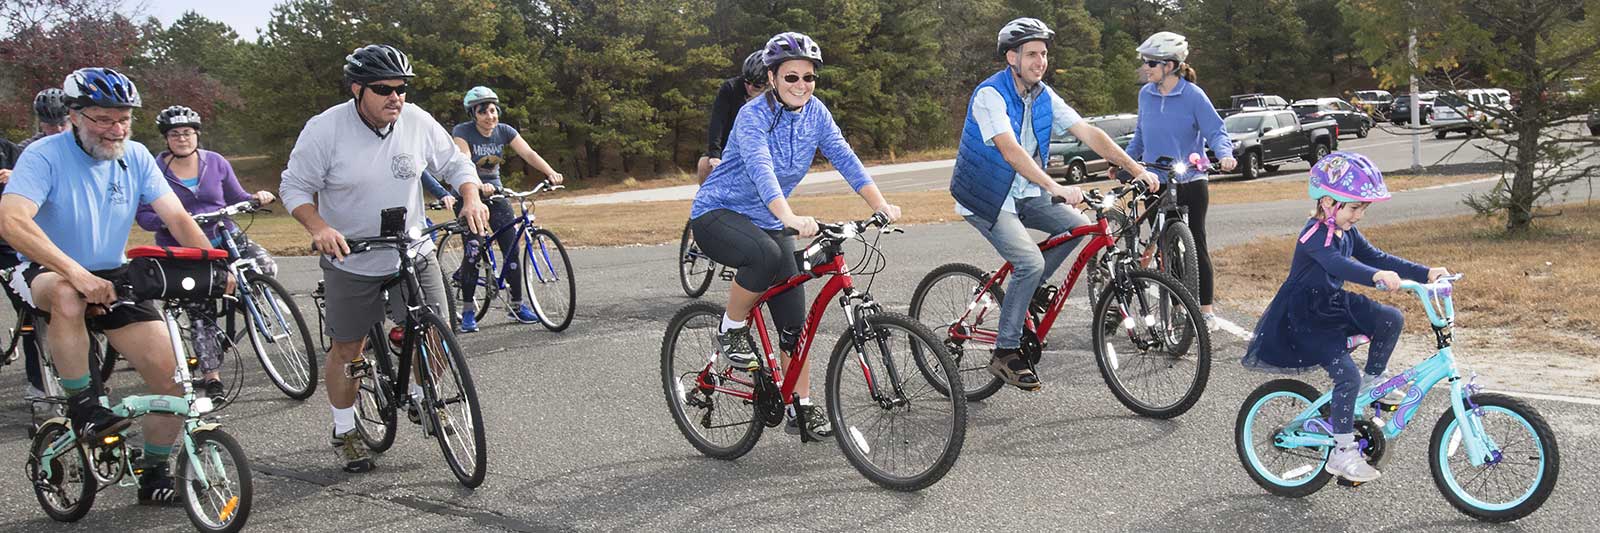 photograph of people bicycling